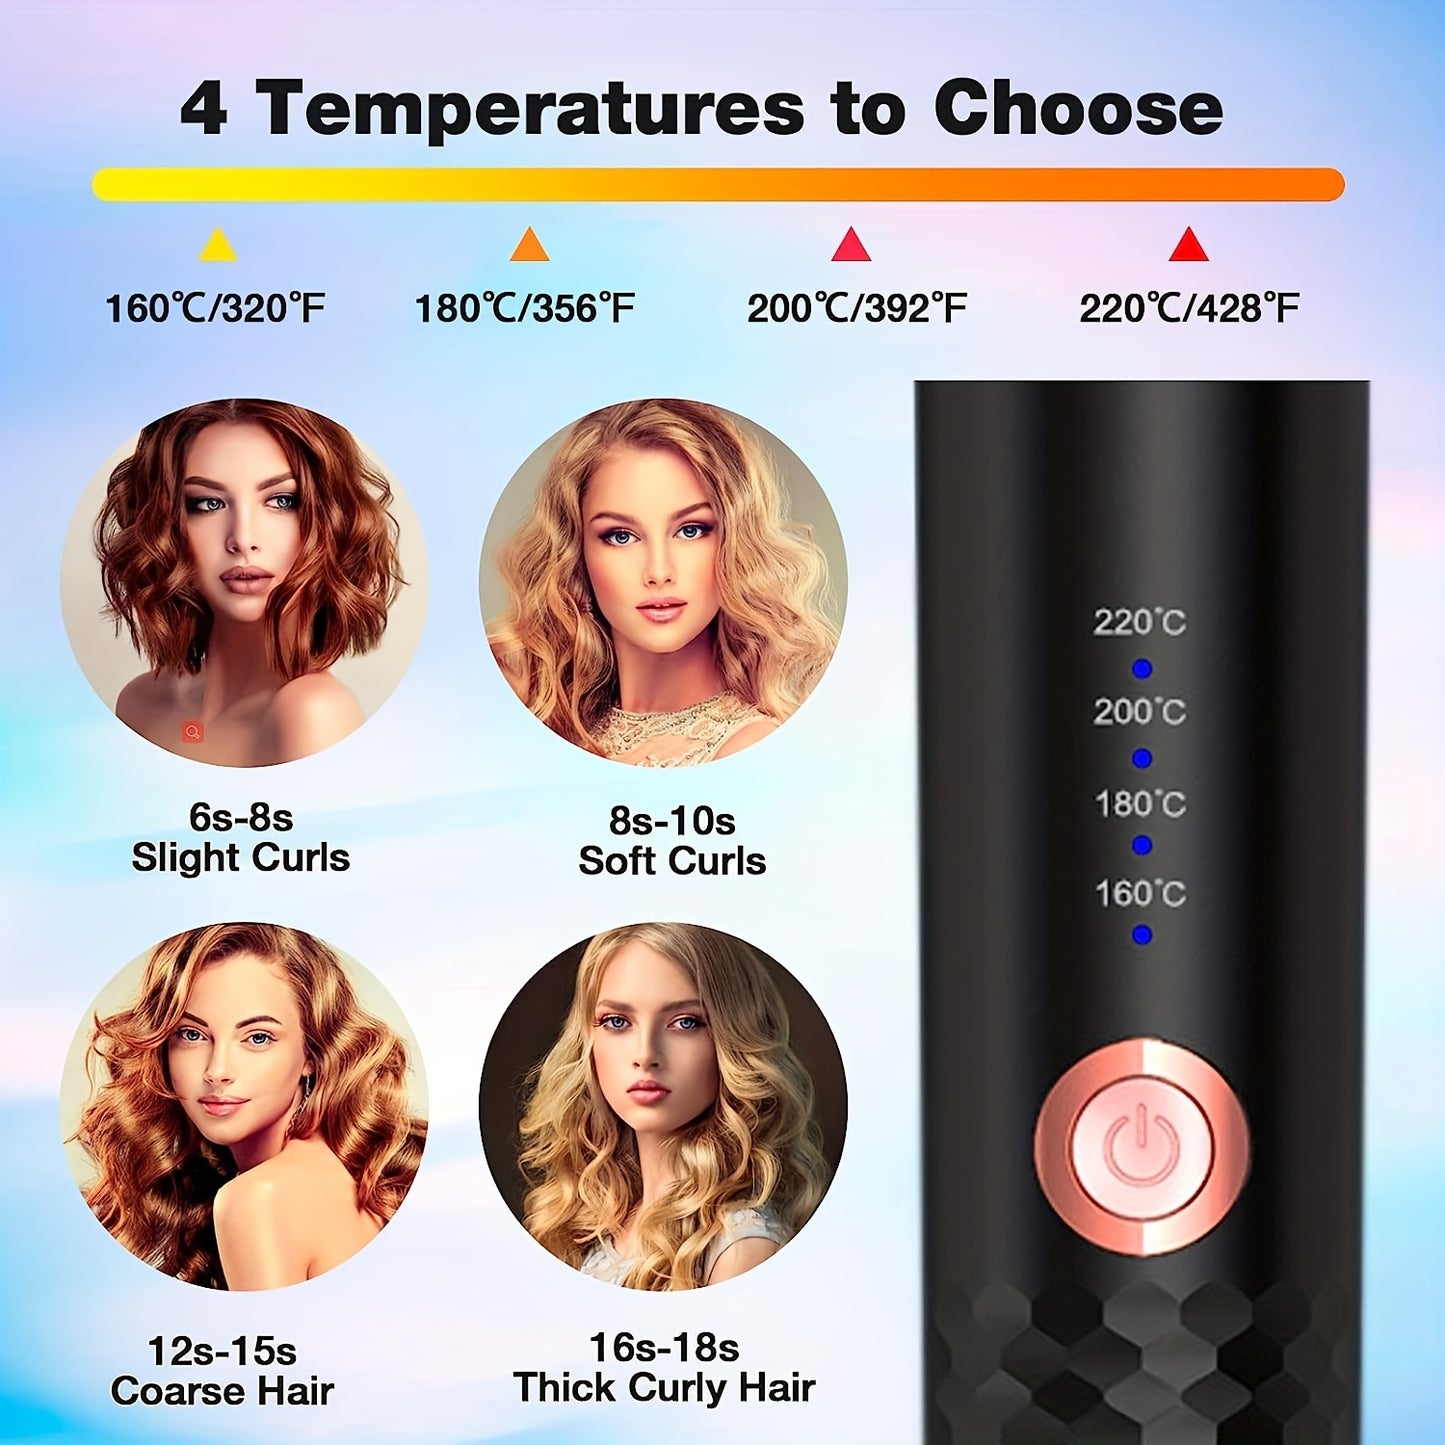 Lomotec 2024 New Automatic Hair Curler - Ceramic Ionic Barrel, Large 1" Rotating Barrel, 4 Temps & 3 Timer Settings, Dual Voltage Spin Iron for Hair Styling